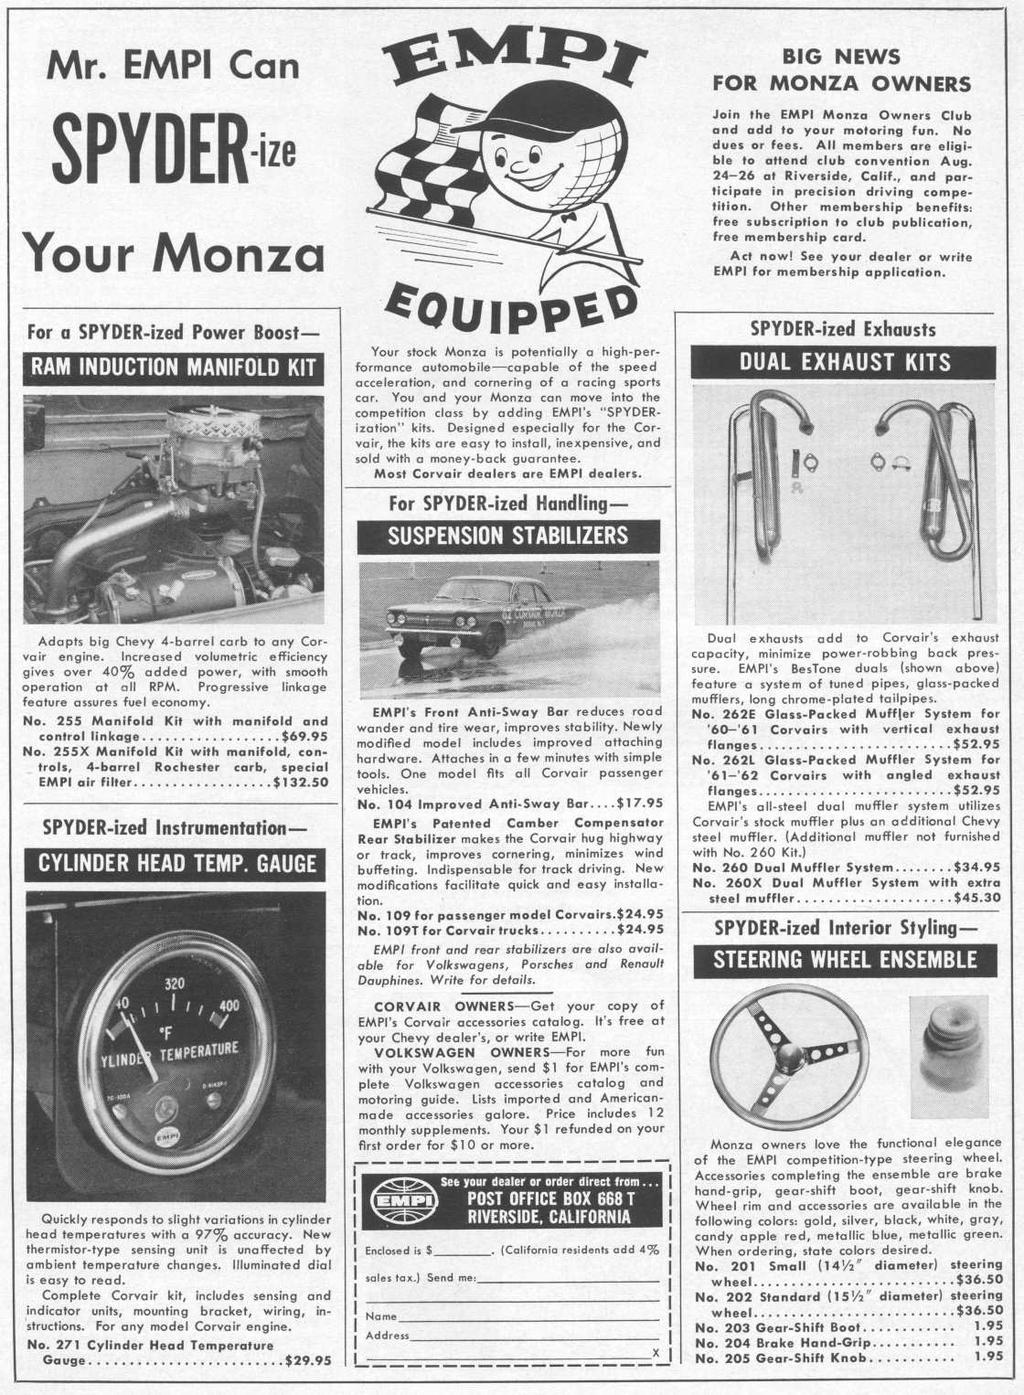 PAGE 7 EMPI started out life as European Motor Products, Inc. During the 1950s, it evolved into a parts house for Volkswagen Beetle performance parts.